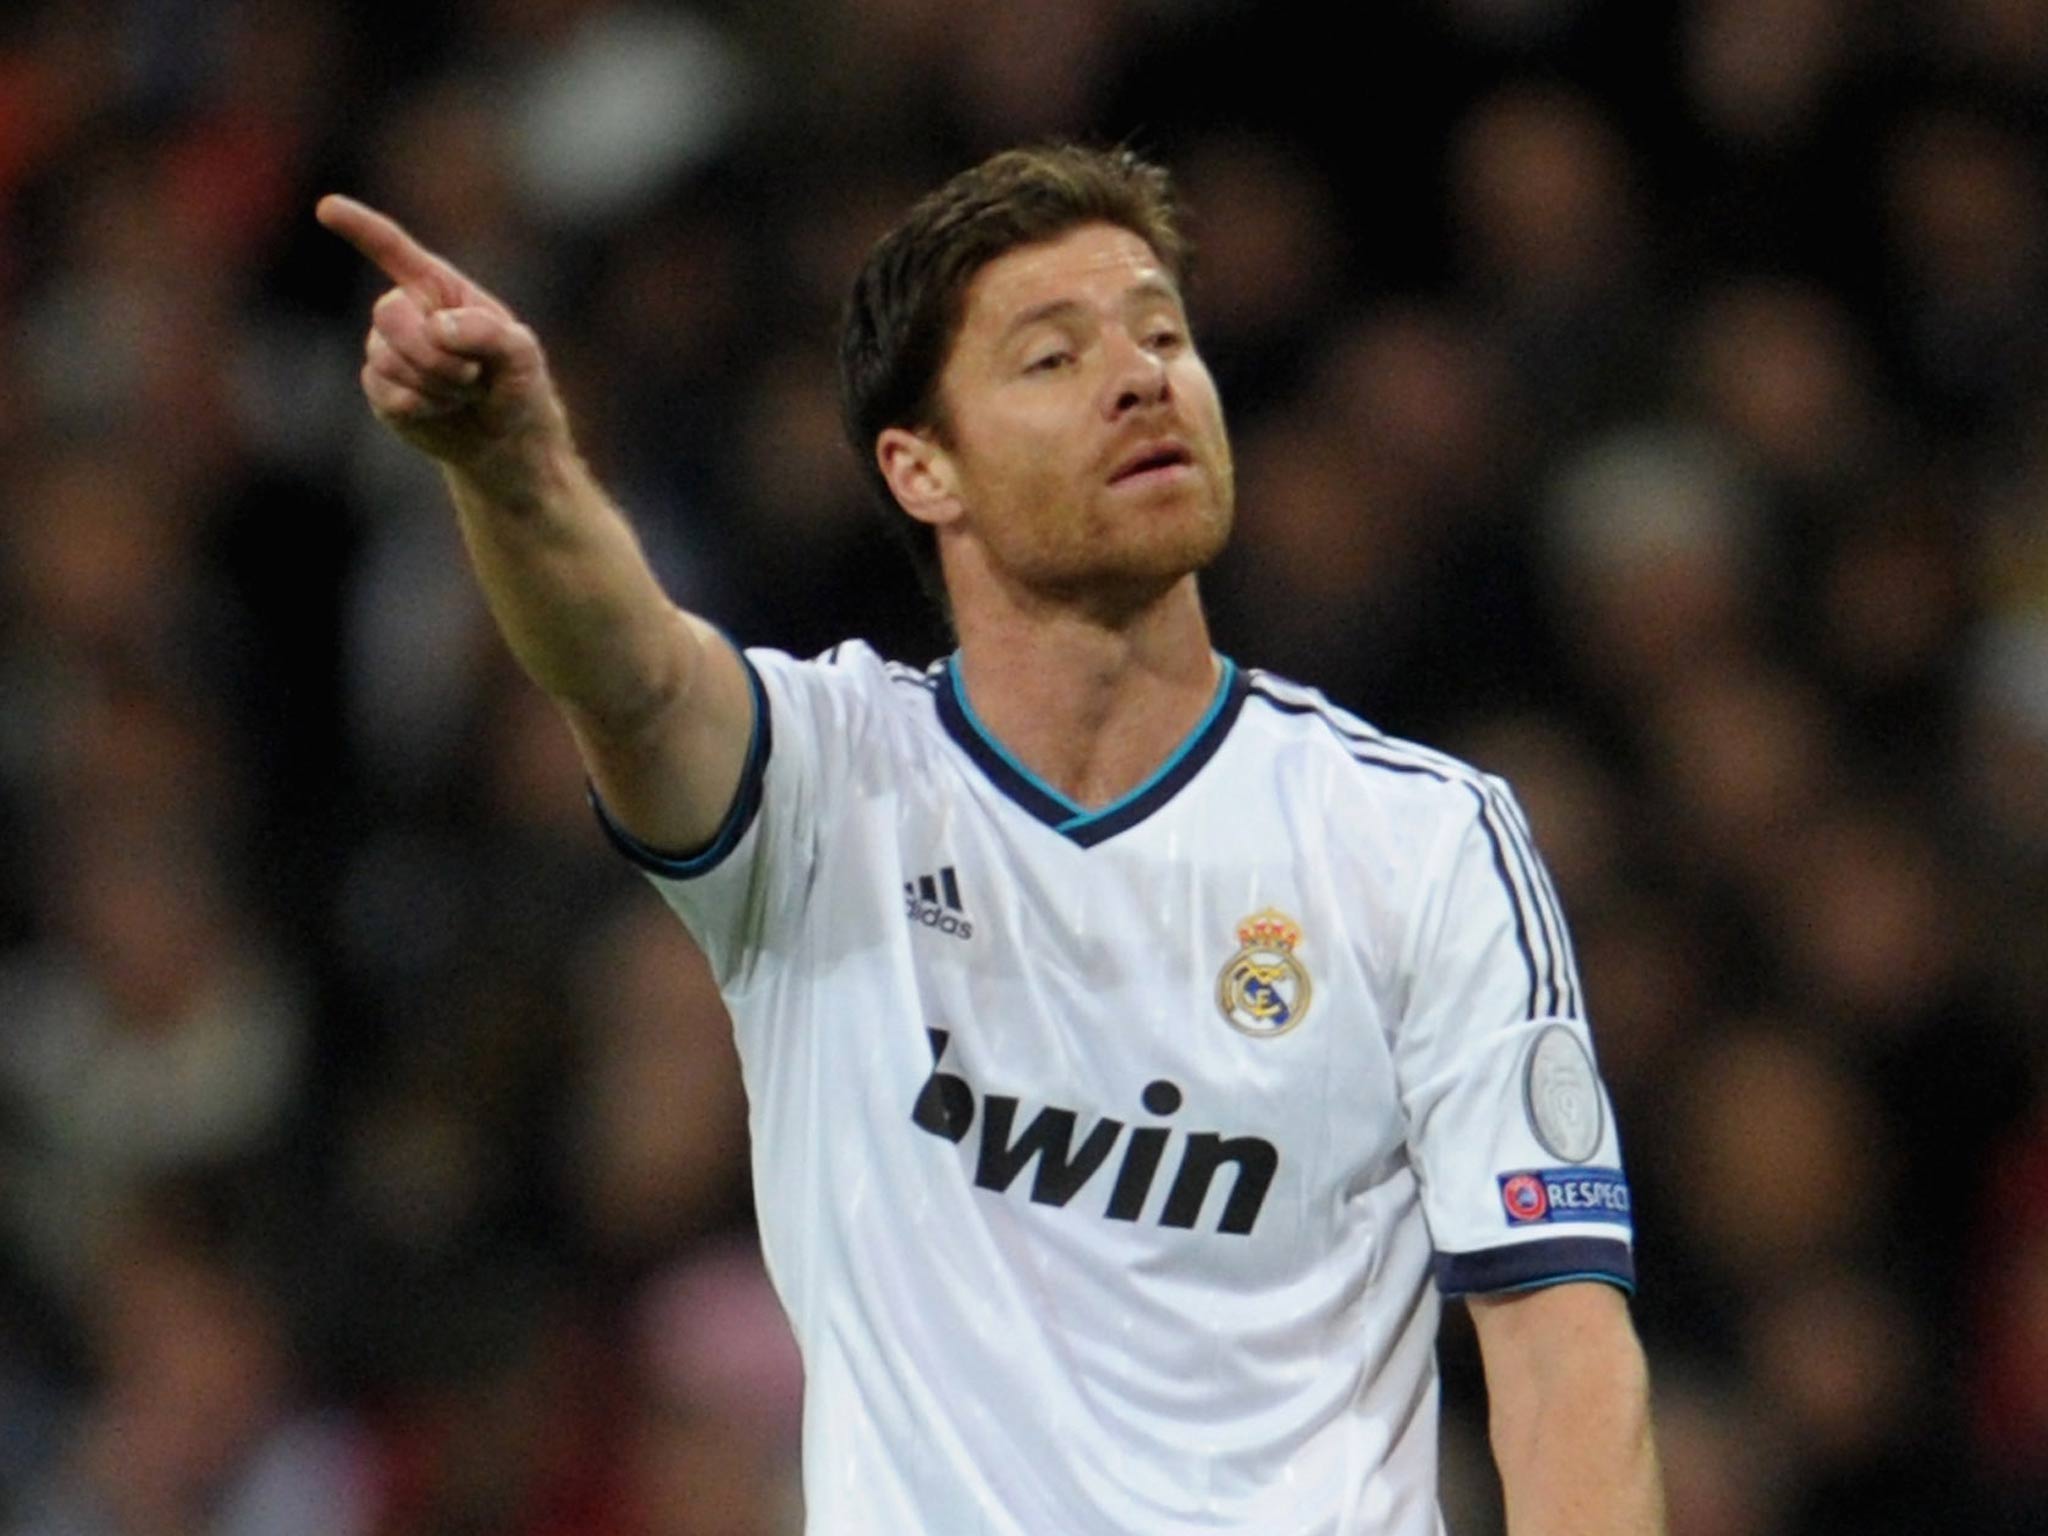 Real Madrid player Xabi Alonso plays down transfer speculation